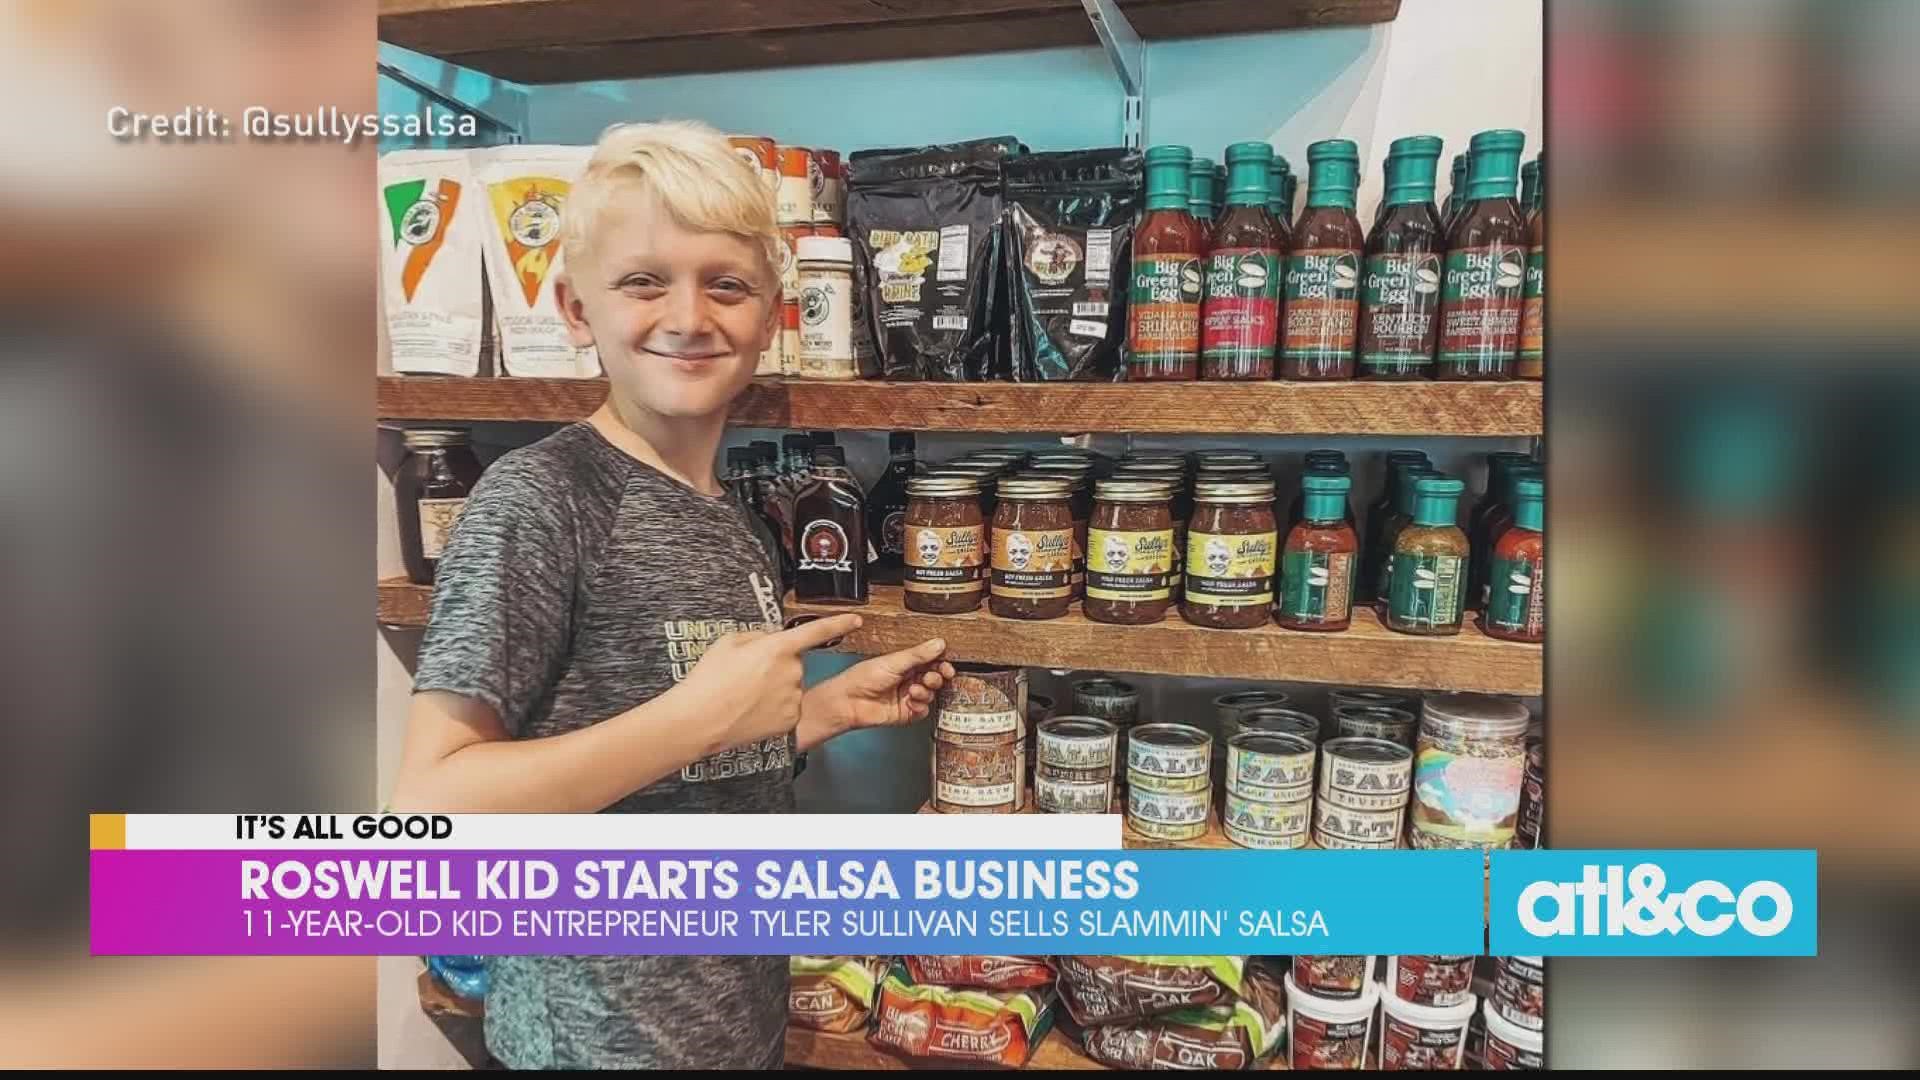 11-year-old Tyler Sullivan started his own booming salsa business when he had to pay back his parents for too many gaming charges.